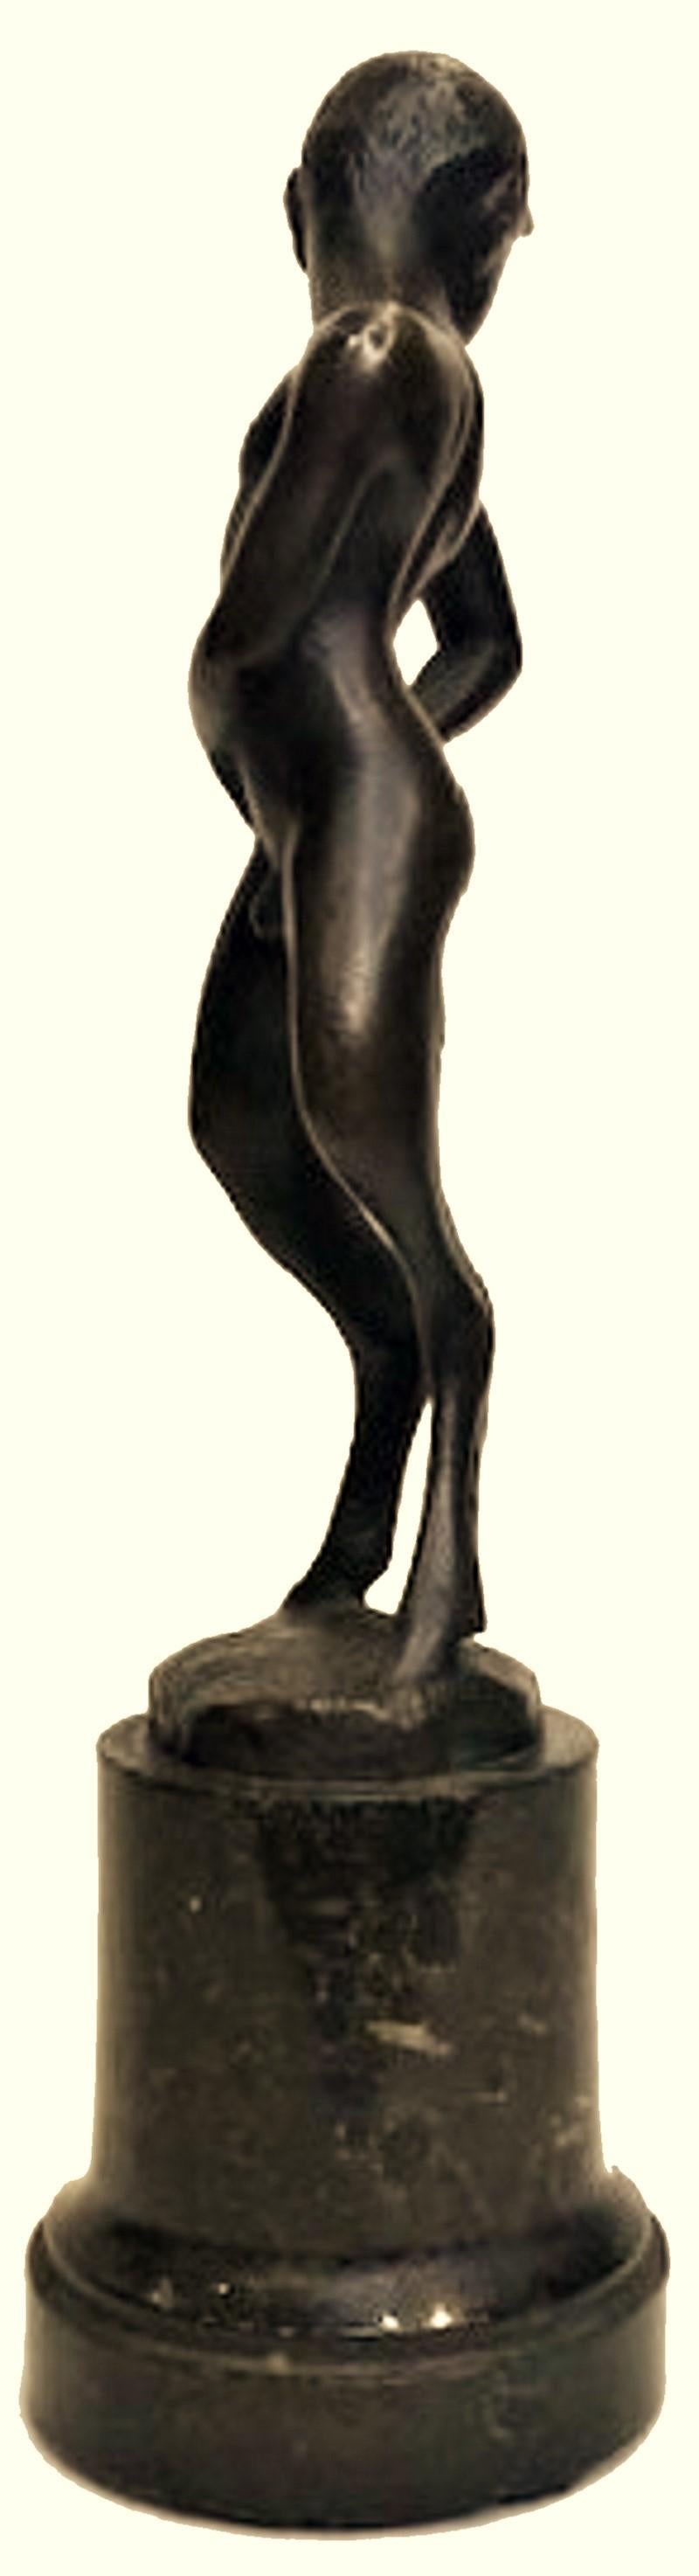 Austrian Jugenstil Patinated Bronze Sculpture of Fawn Youth, Ca. 1900 For Sale 5